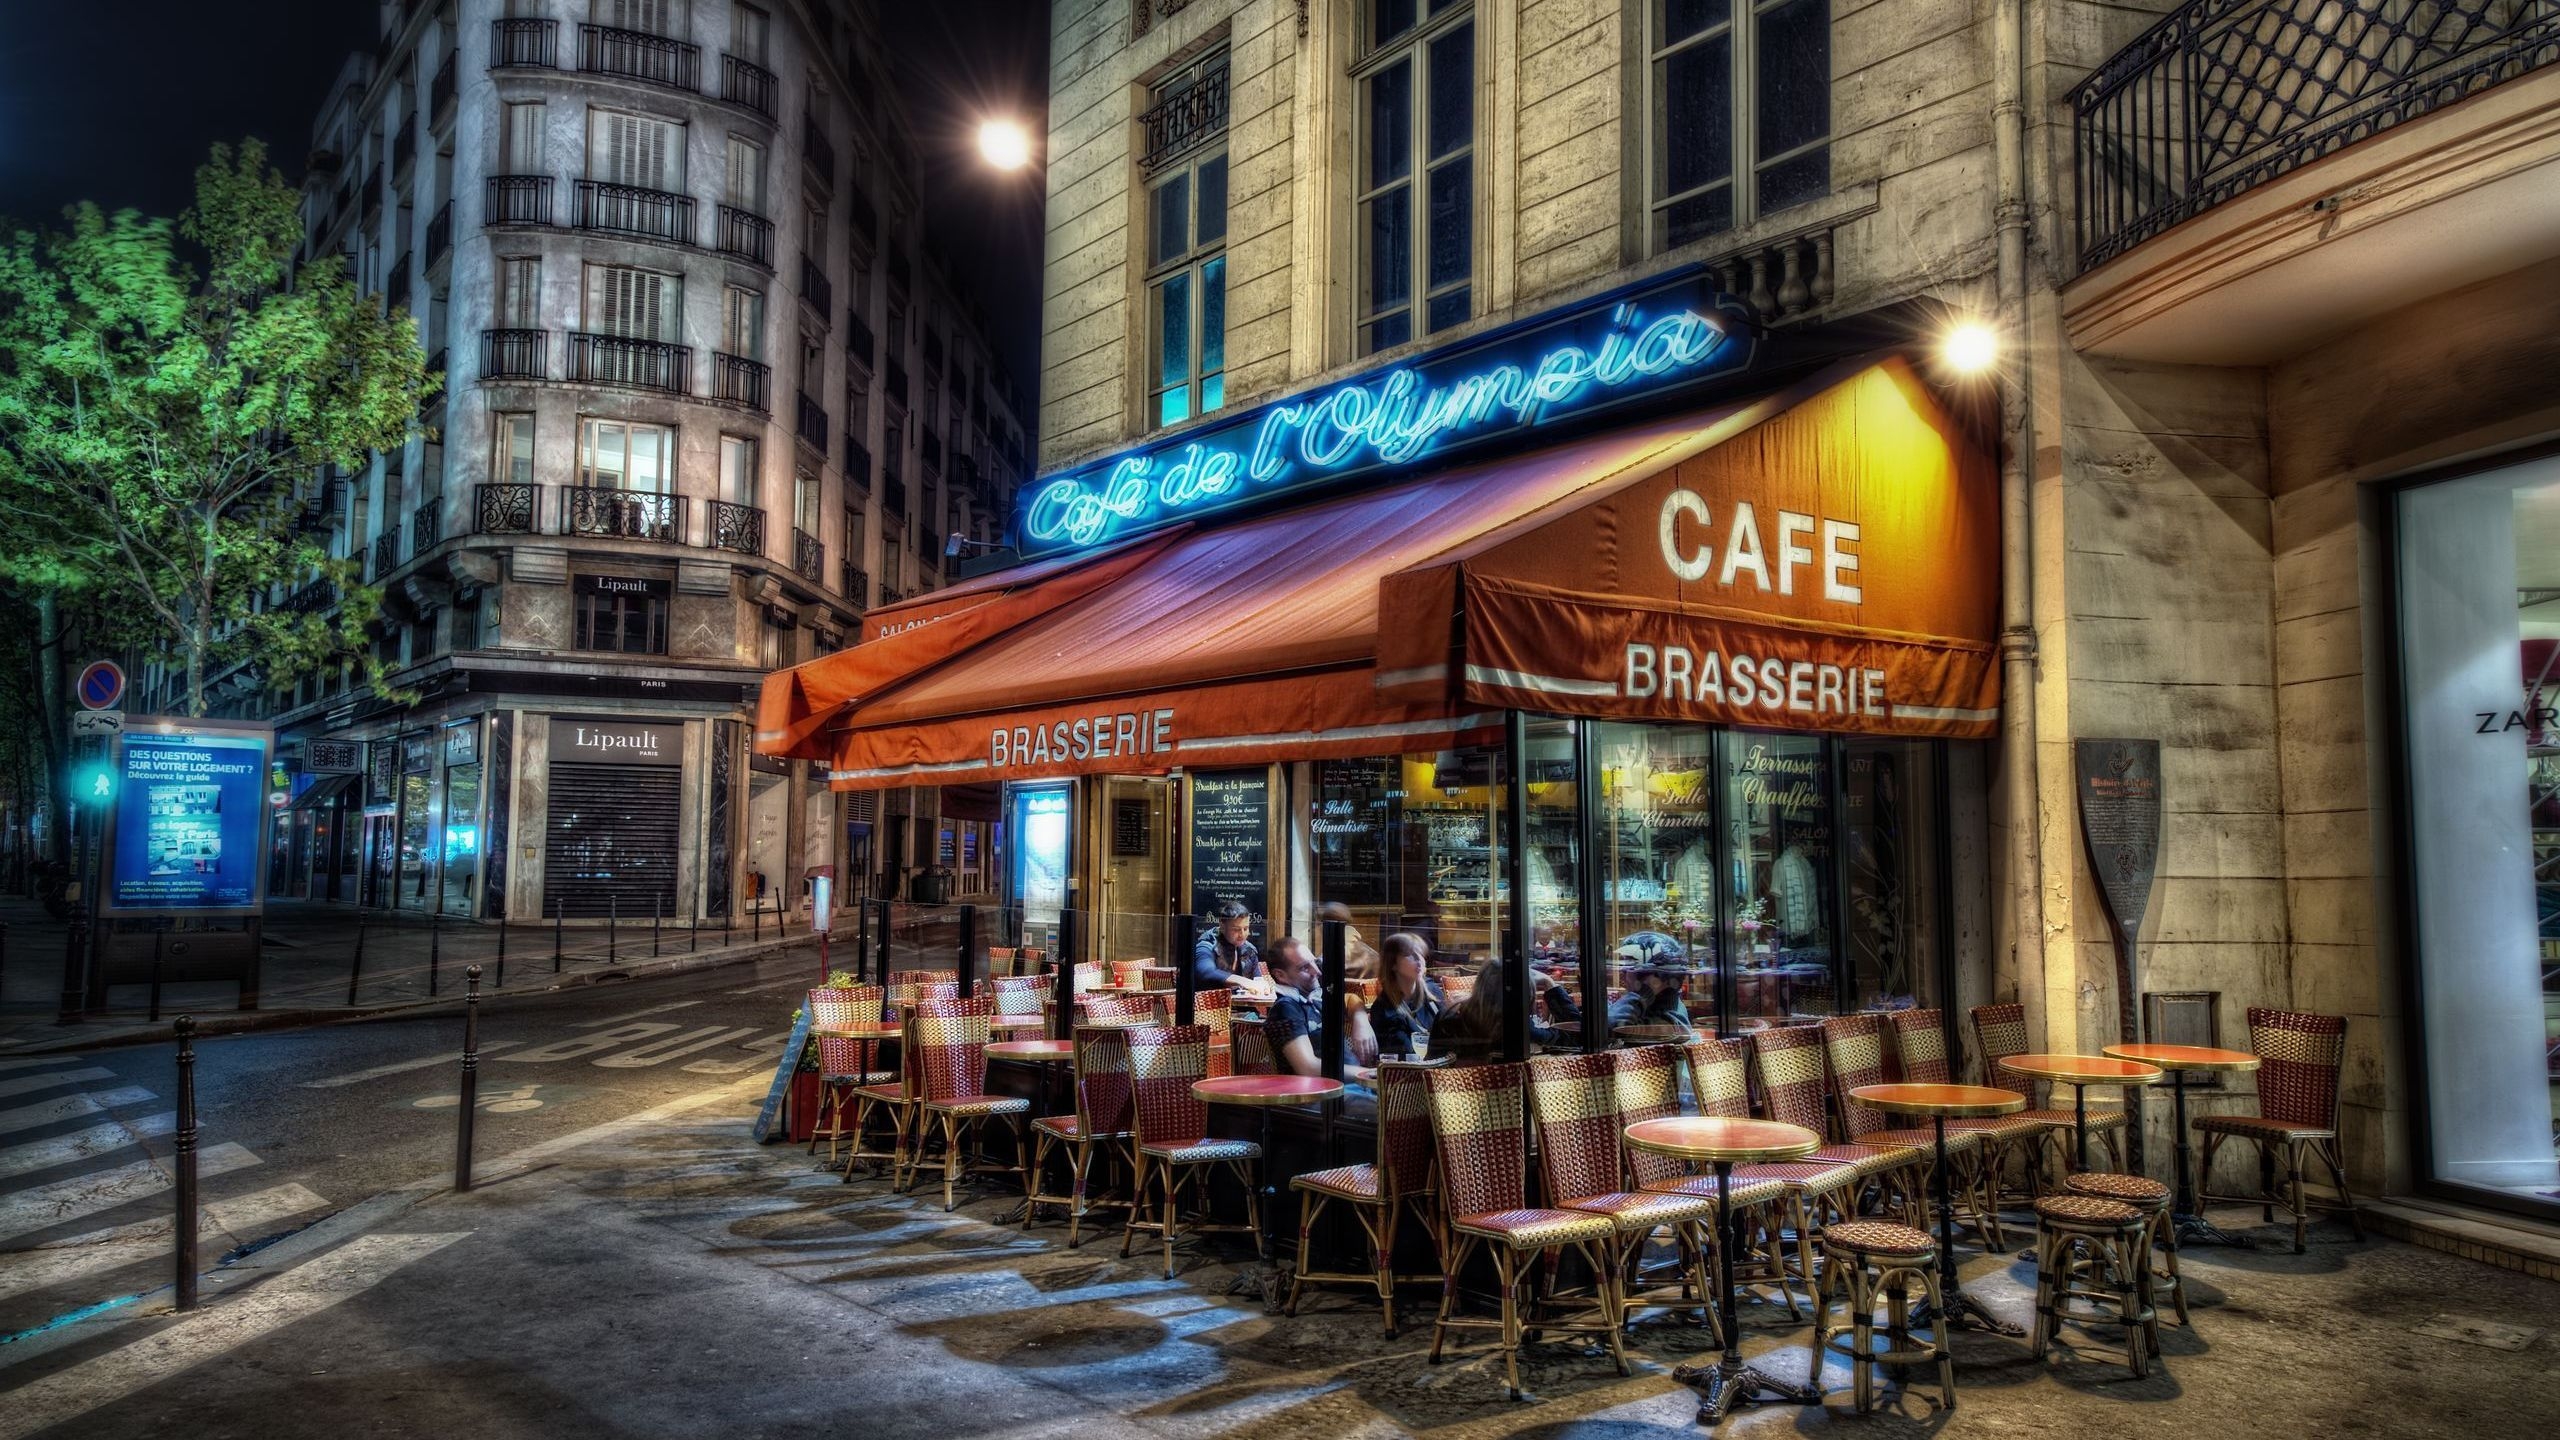 Paris HDR for 2560x1440 HDTV resolution